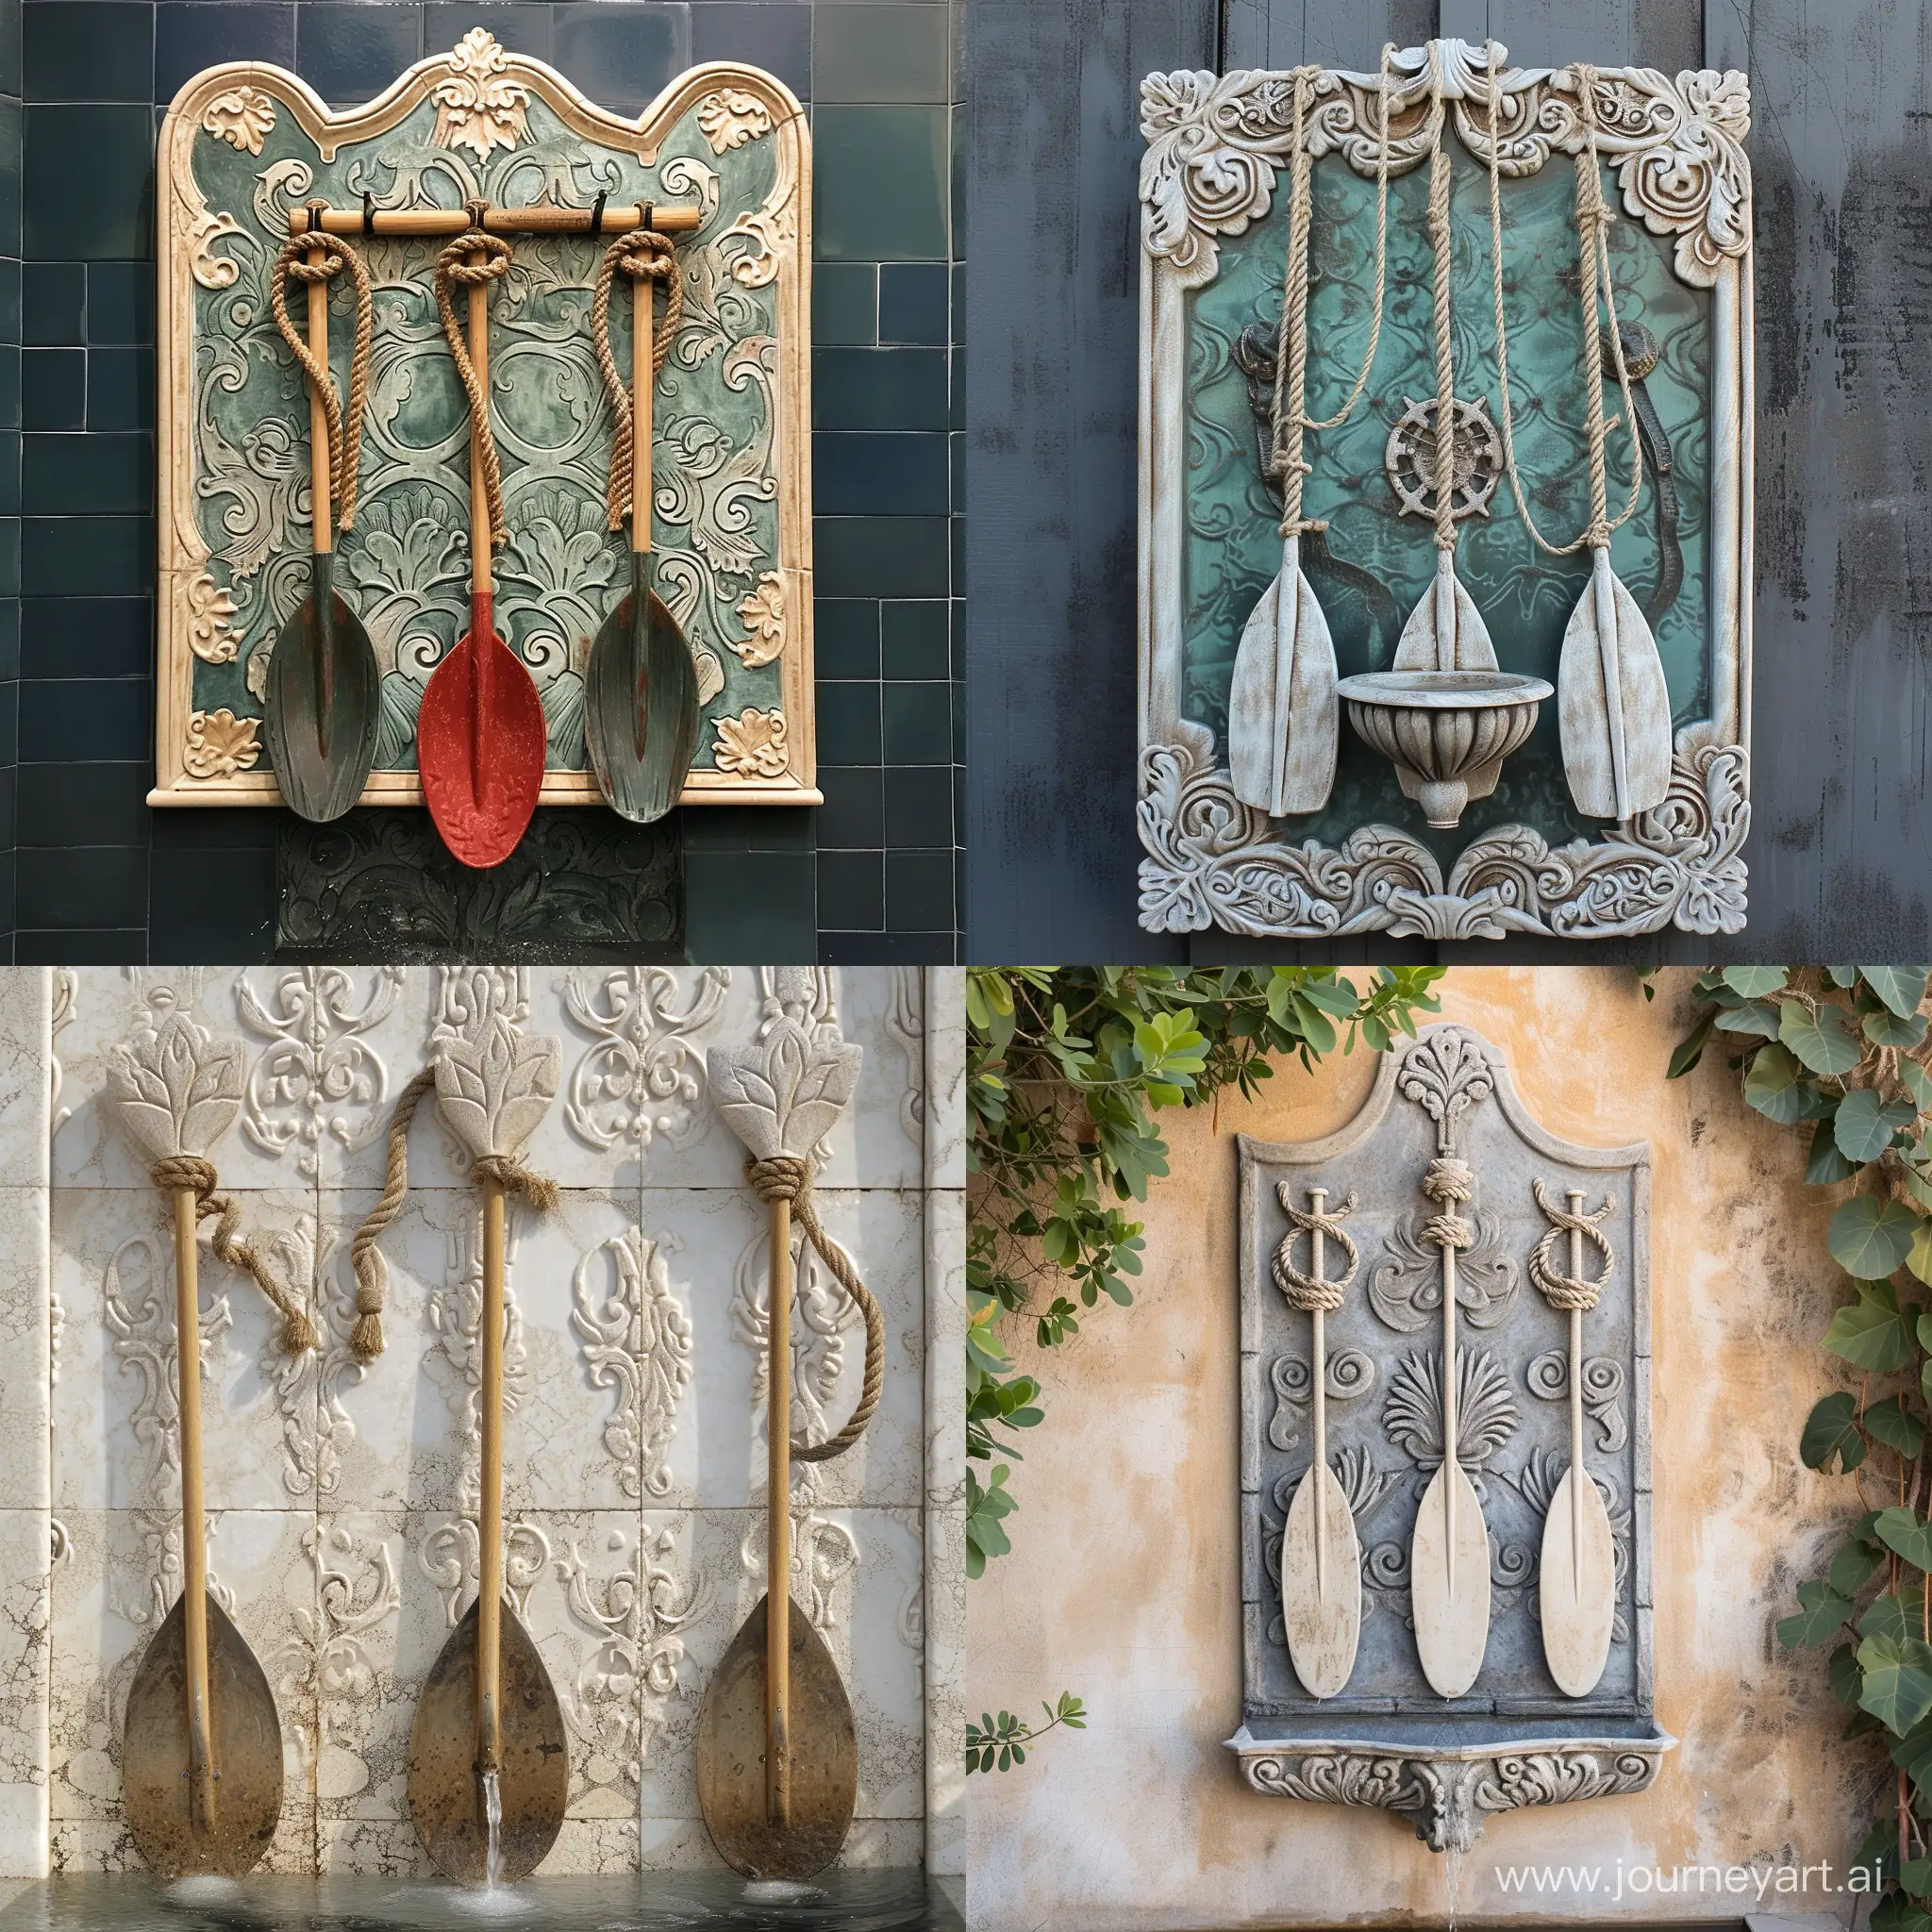 Maritime-Adventure-Sea-Vehicles-Paddles-and-Rope-Against-Baroque-Patterned-Wall-Fountain